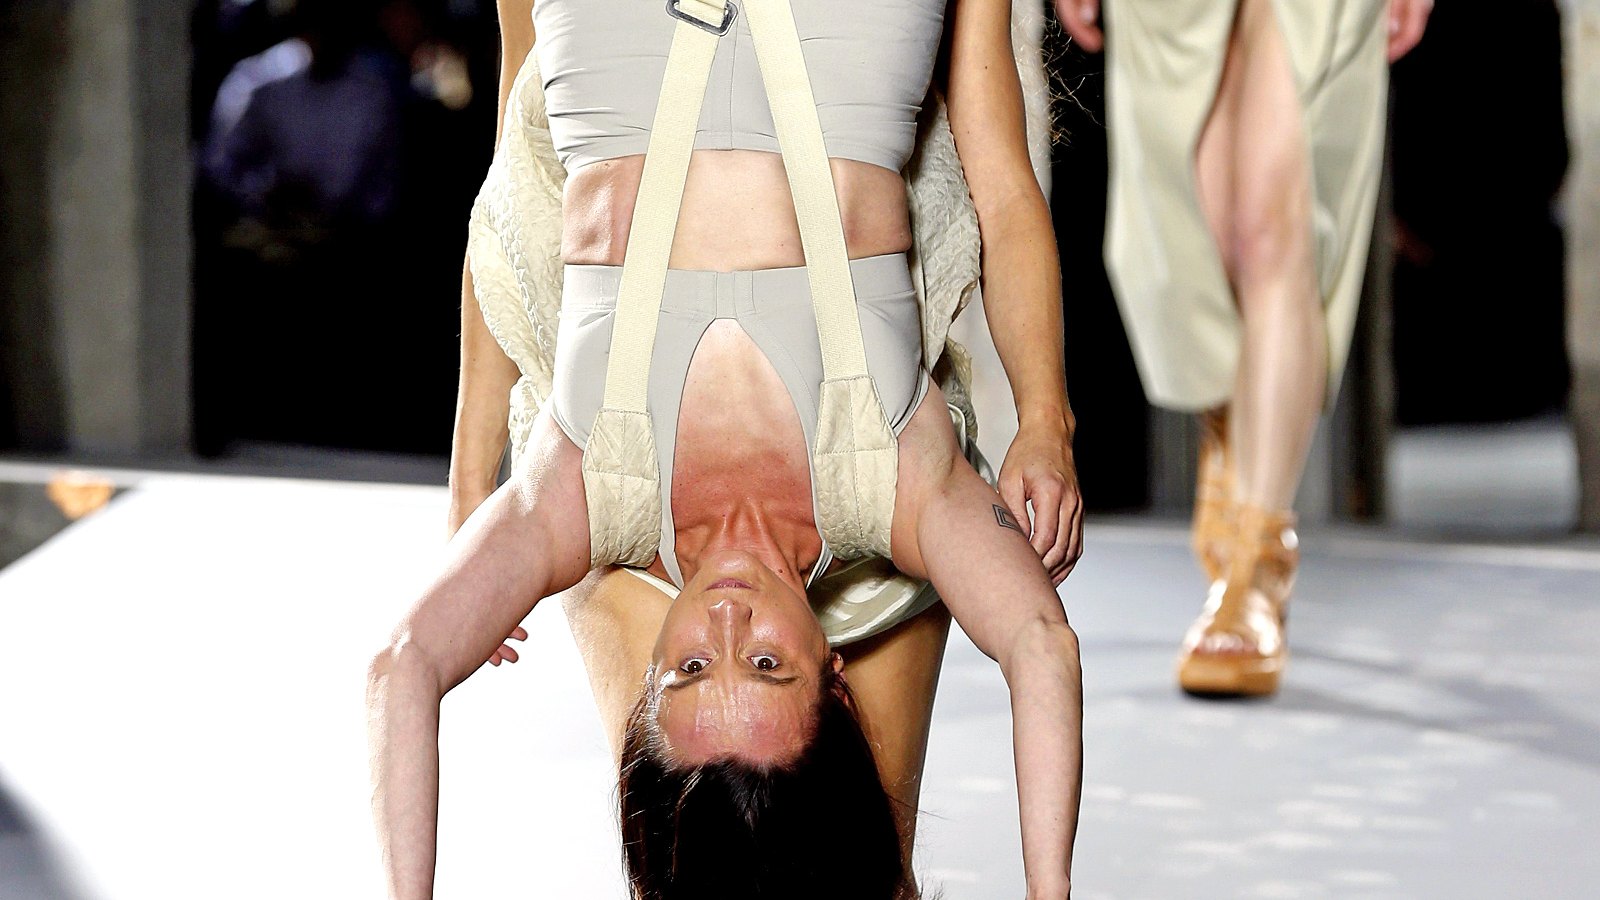 What Is Happening in Rick Owens Spring 2016 Insane PFW Runway Show?